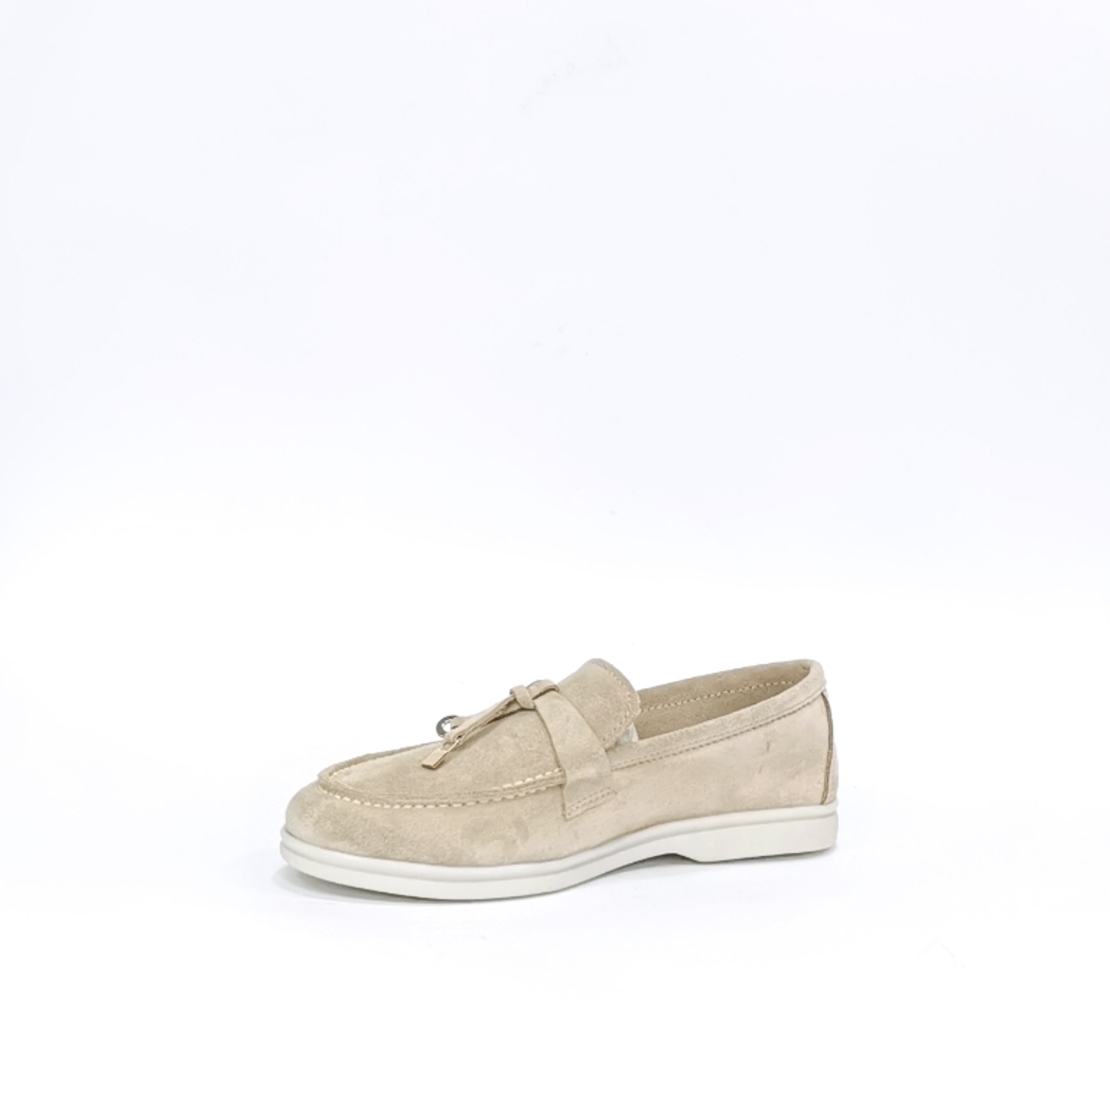 Women's moccasins / loafers / made of natural leather in beige color/7750